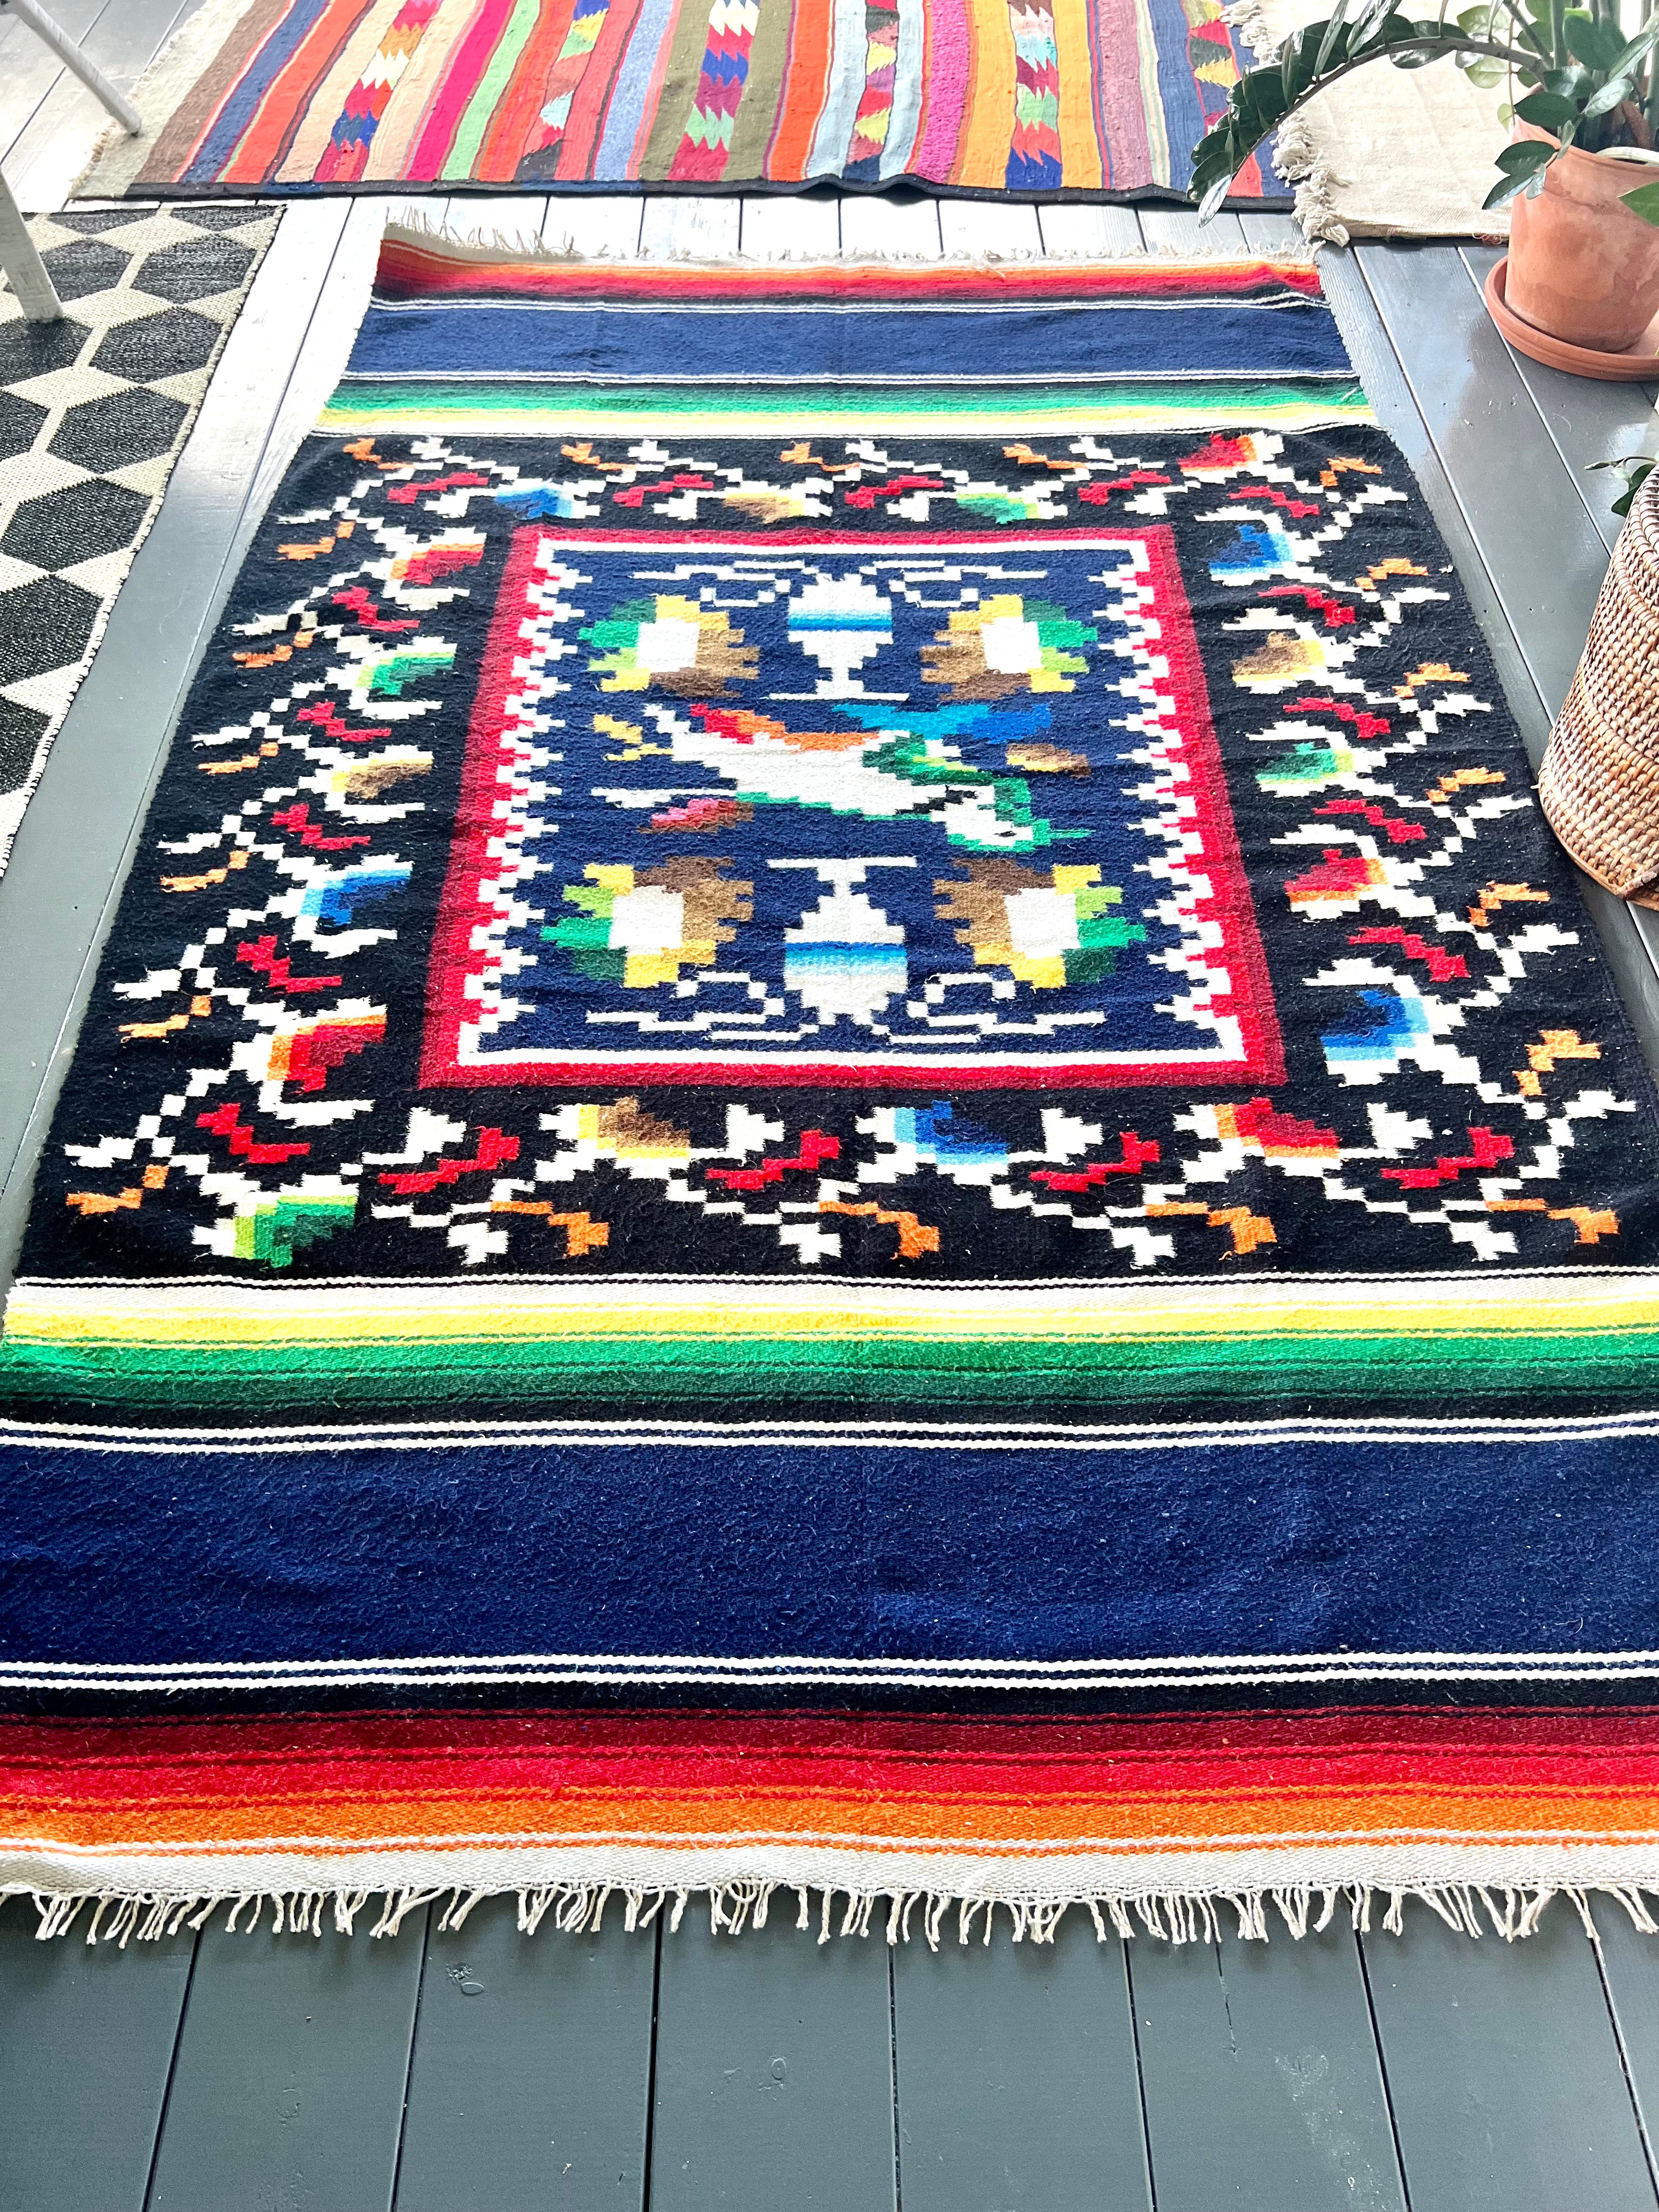 VINTAGE SOUTH AMERICAN Kilim| Authentic Tapestry| Area RUG| 7’ x 4’ - Honorooroo Lifestyle